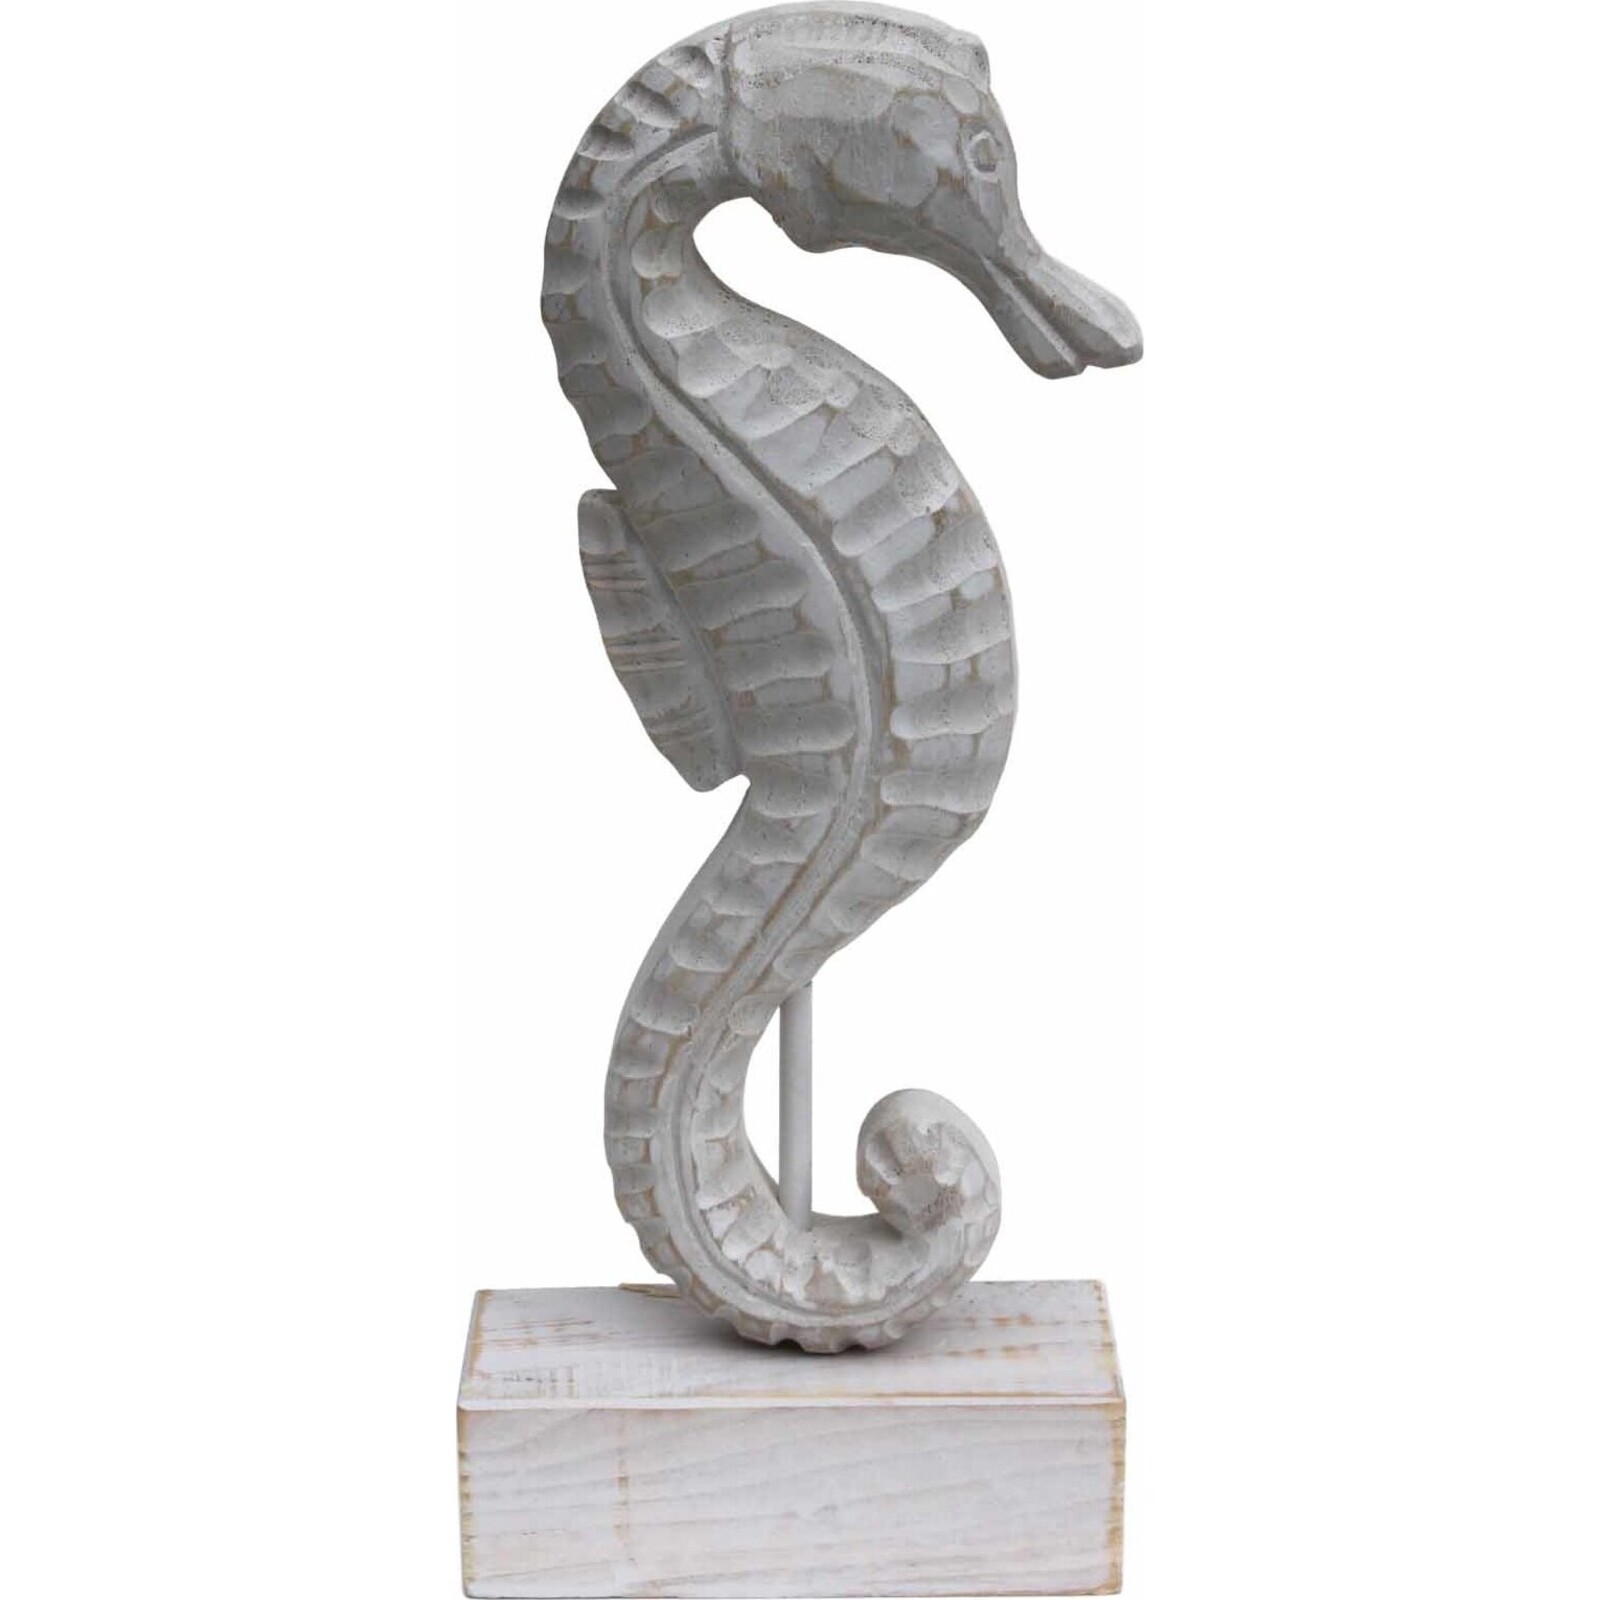 Seahorse on Stand